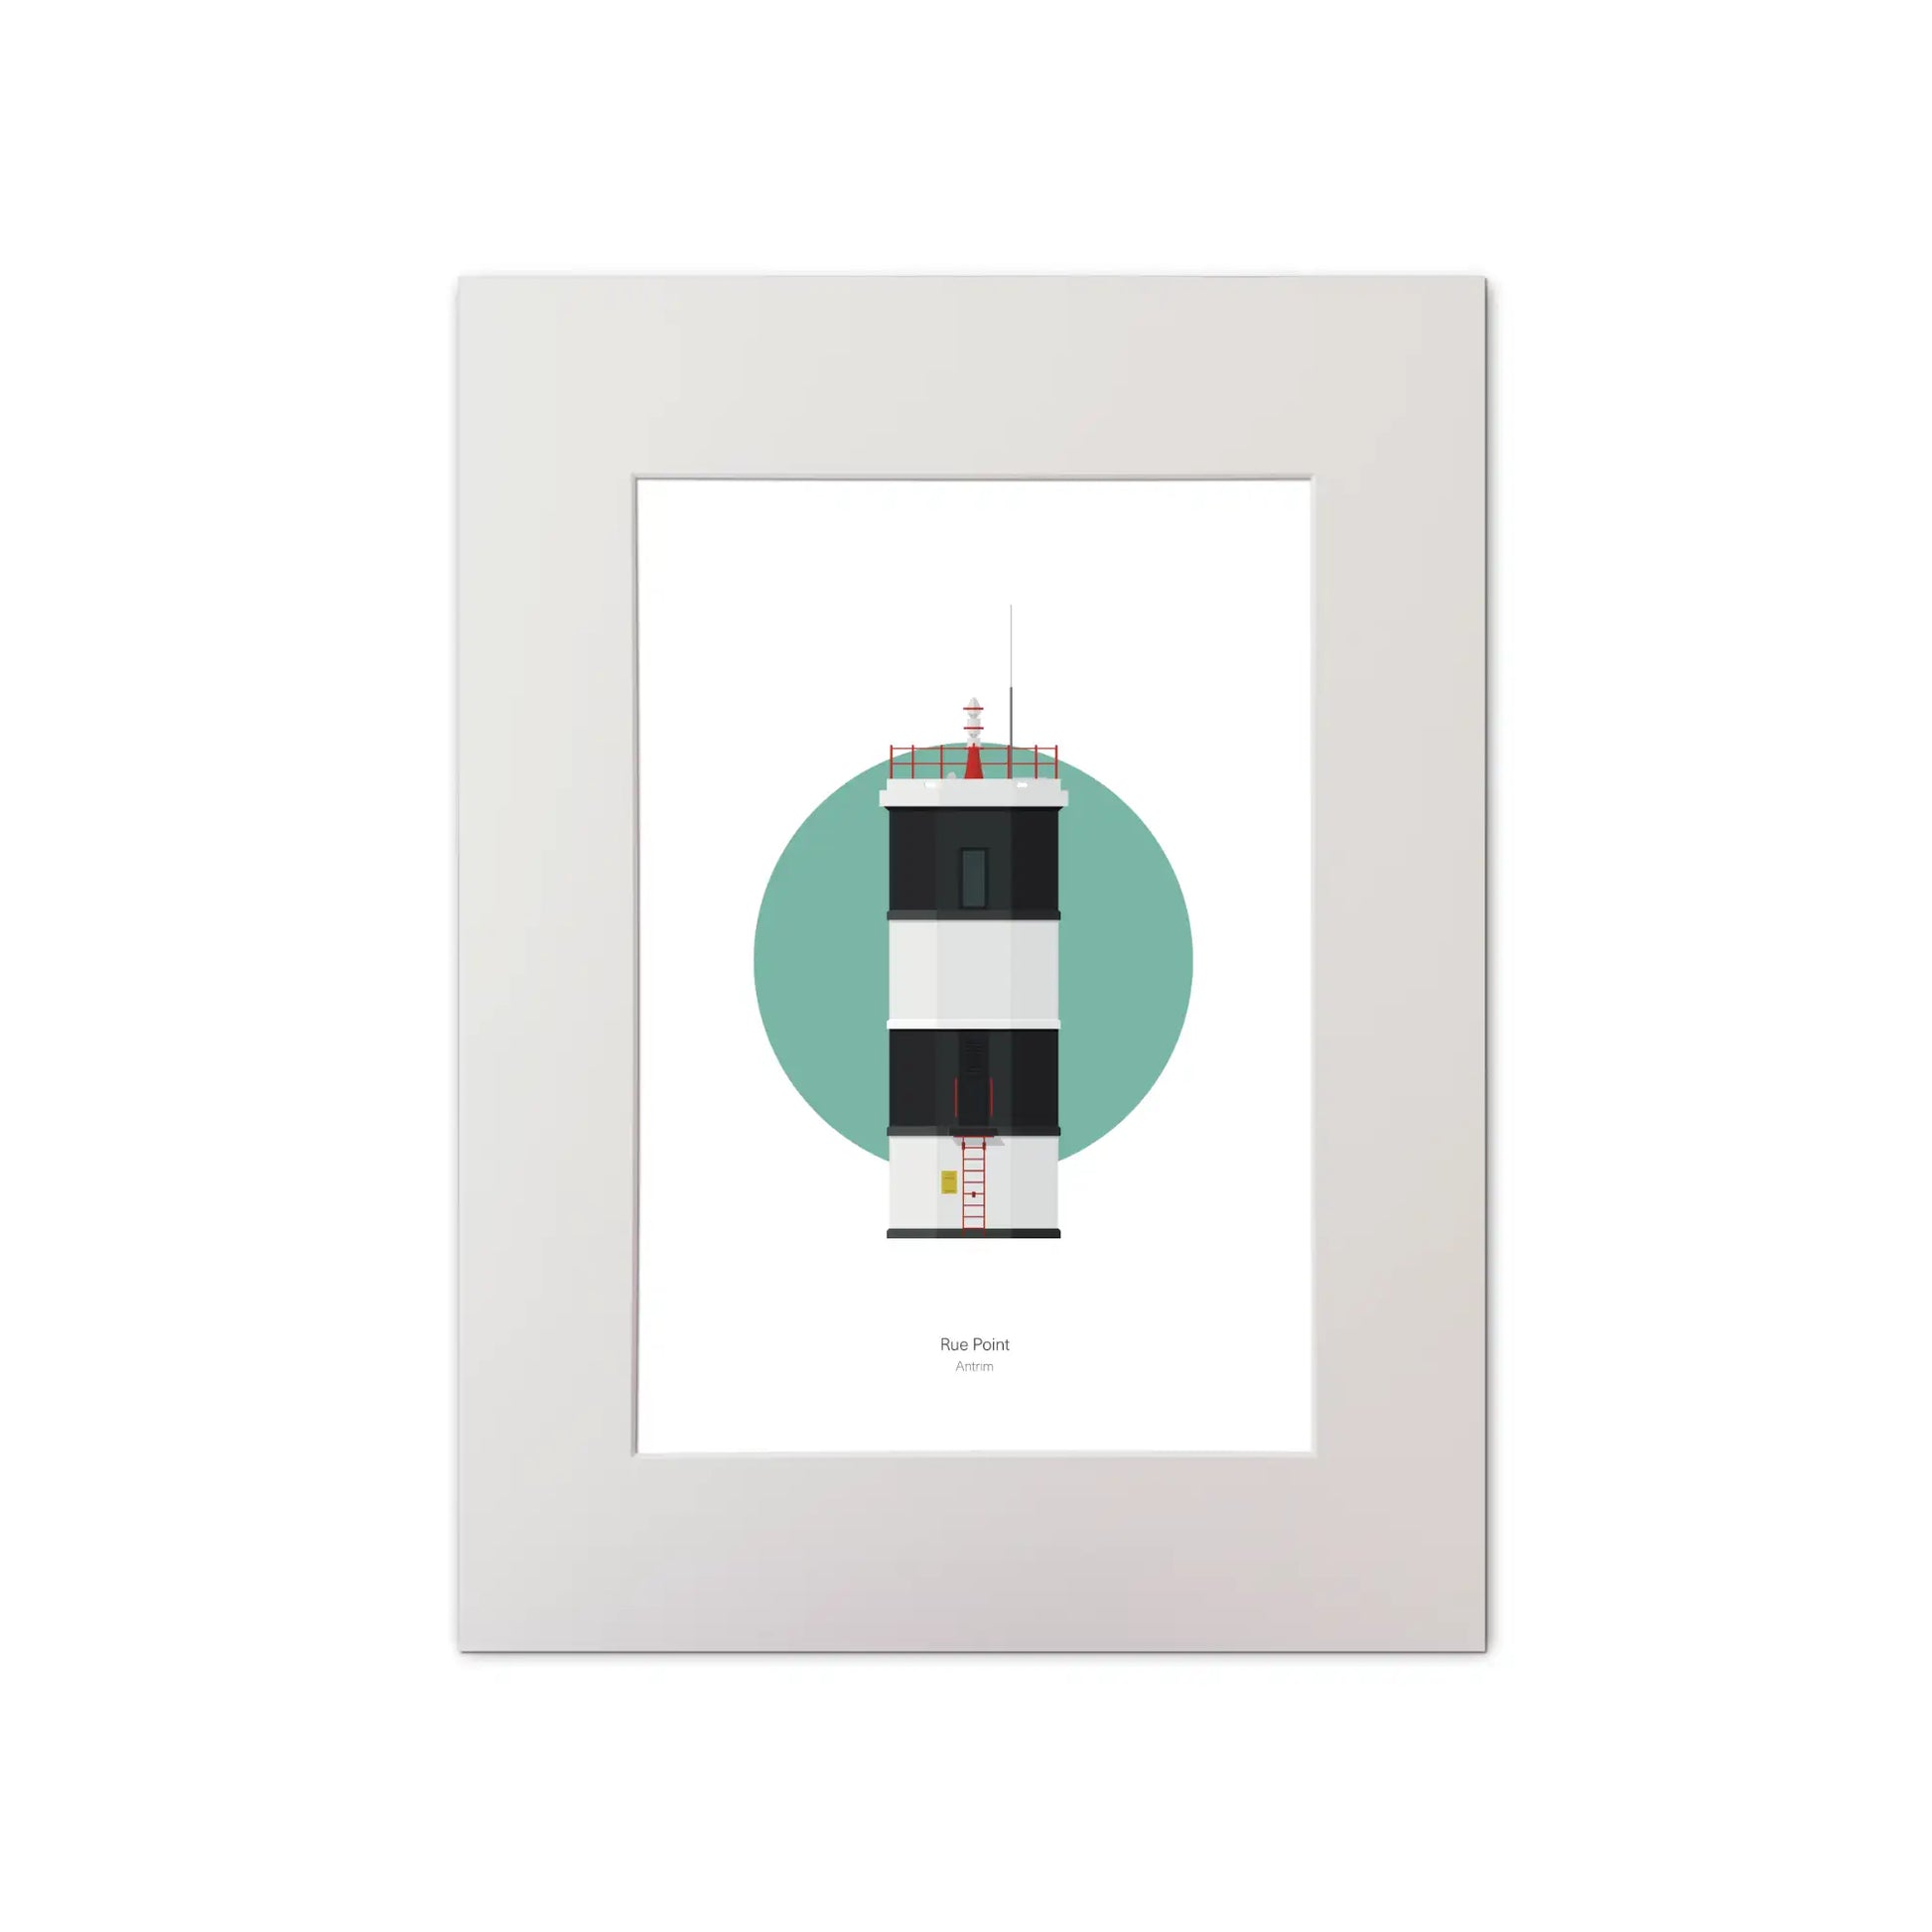 Contemporary graphic illustration of Rue Point lighthouse on a white background inside light blue square, mounted and measuring 30x40cm.